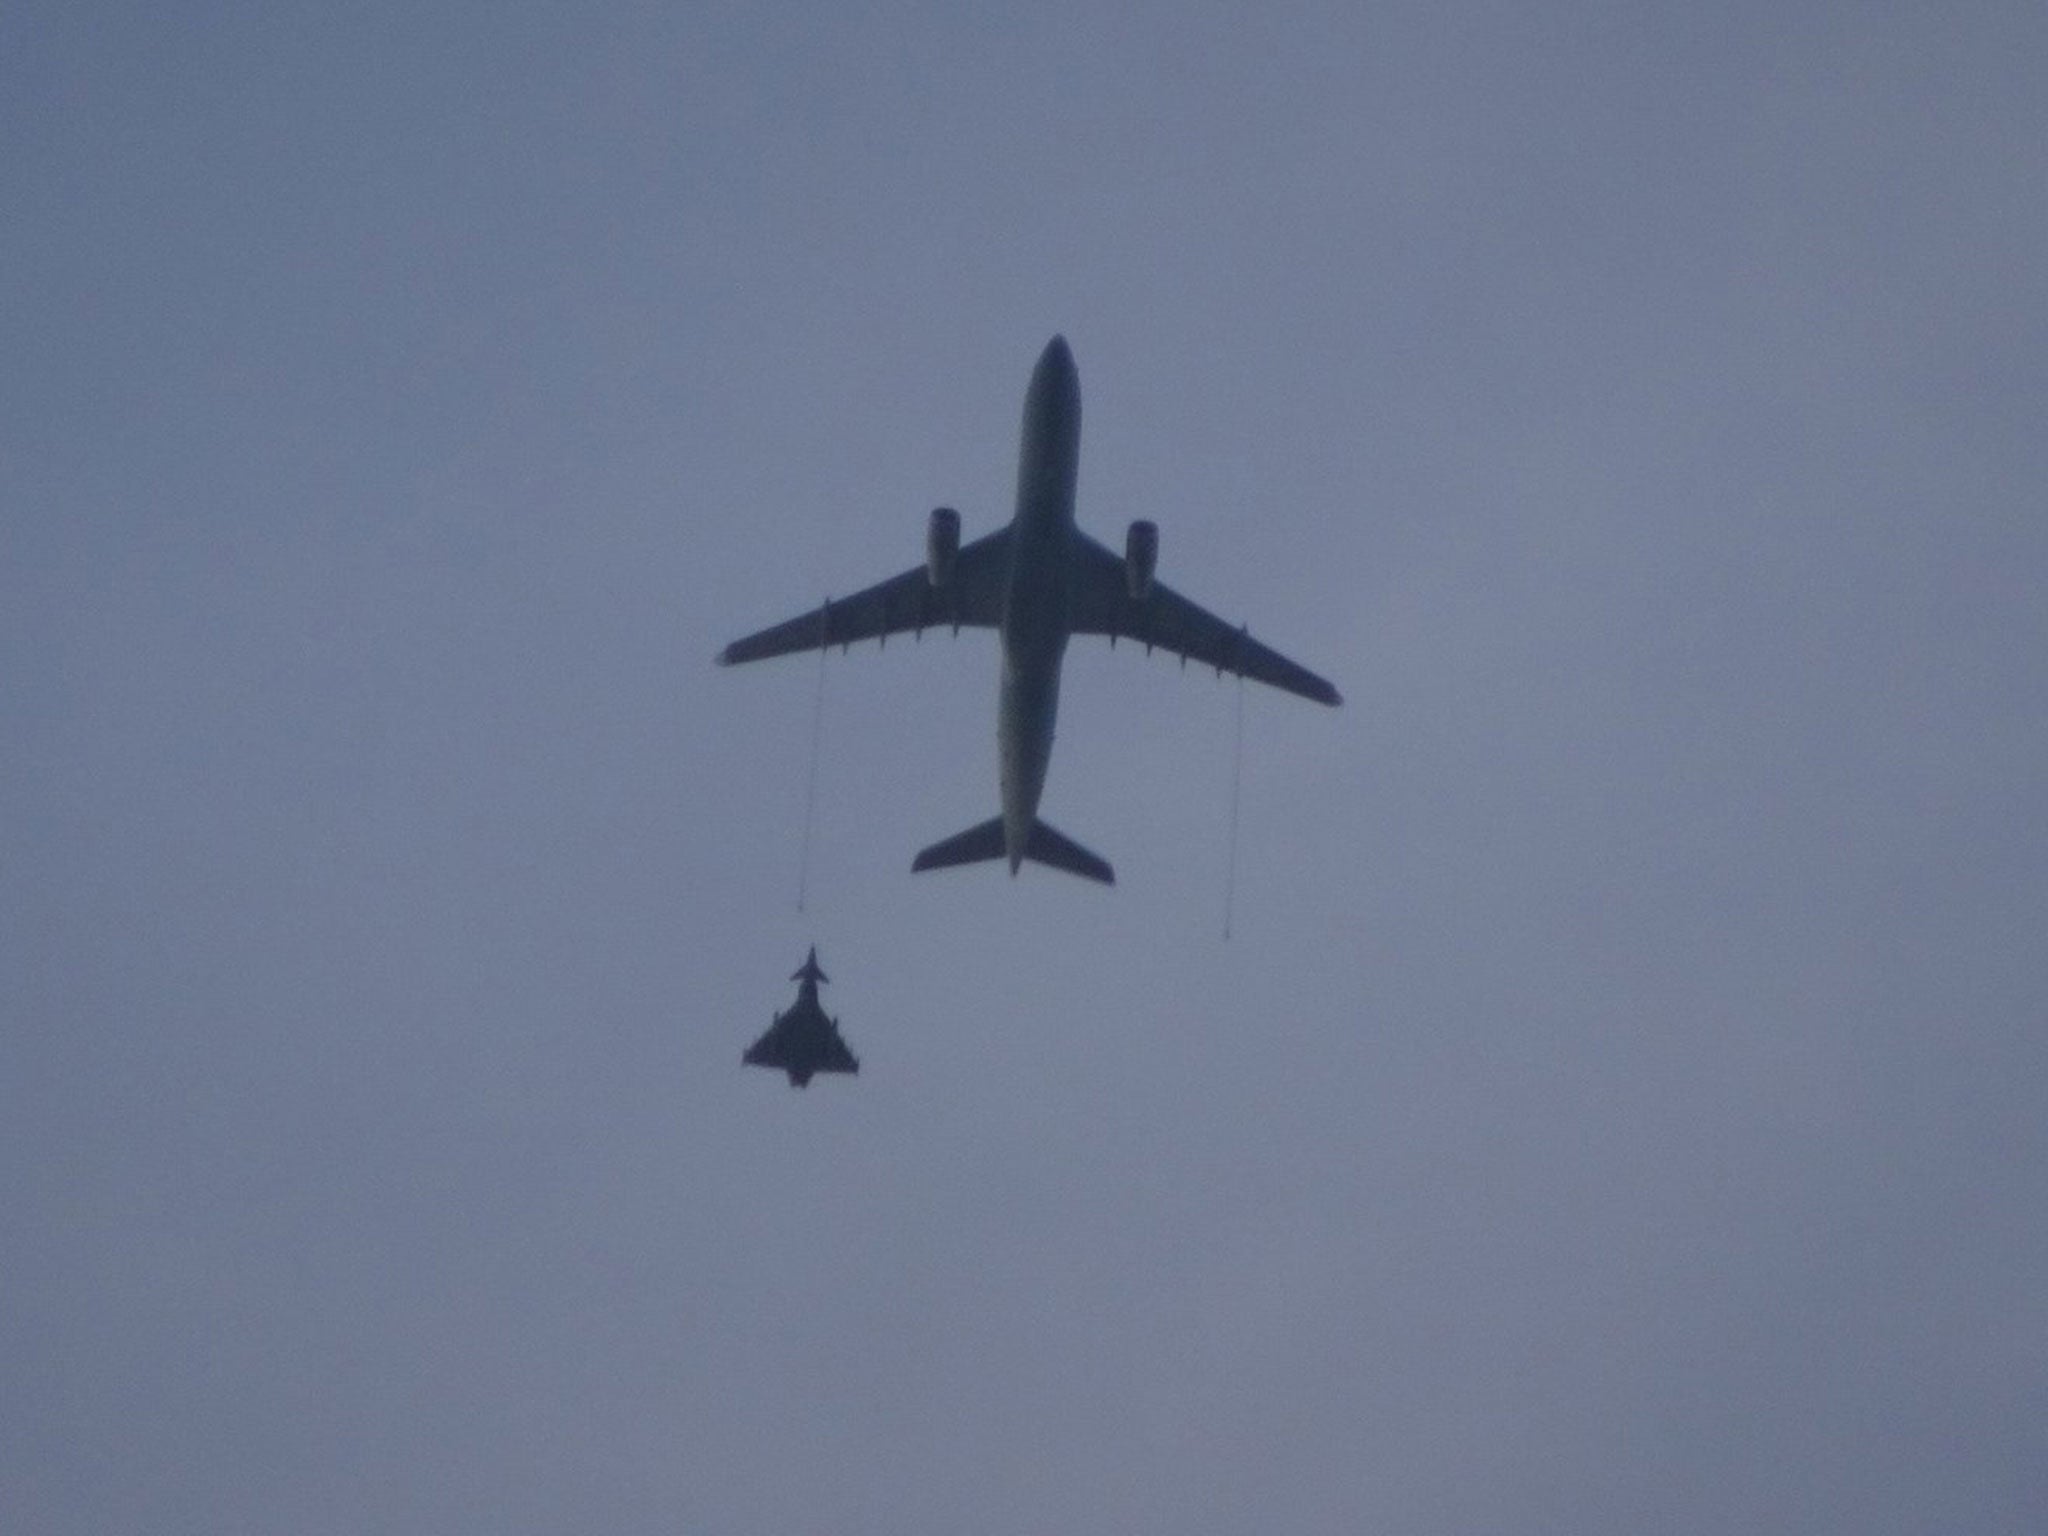 An RAF Voyager refuelling aircraft and Typhoon jet during an operation to intercept a civilian plane on 7 March